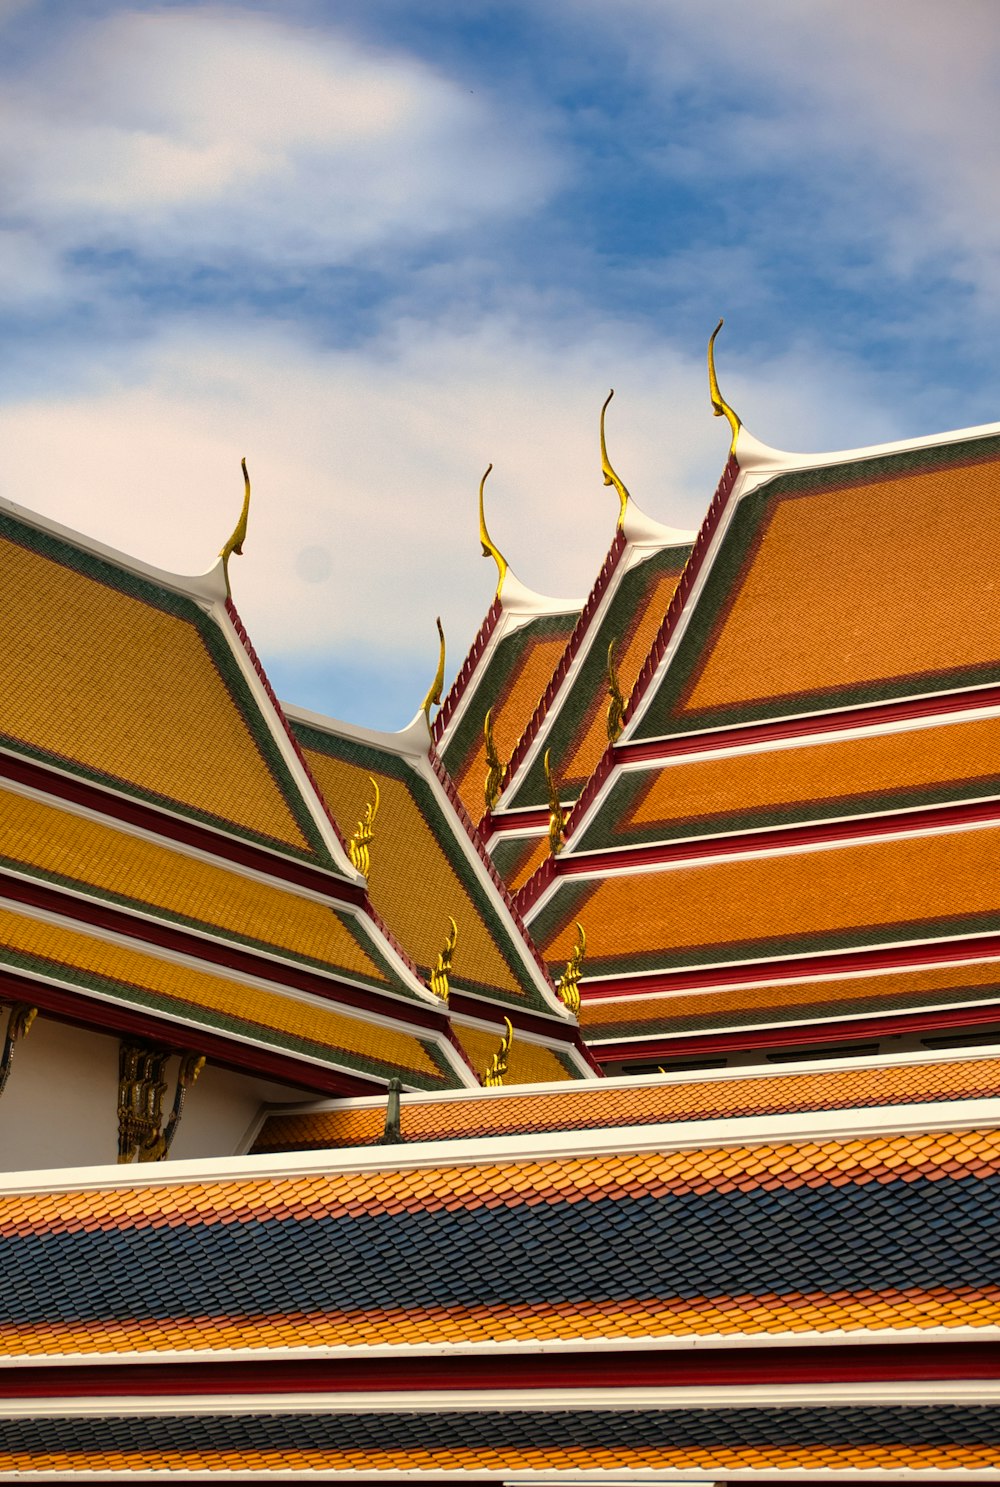 the roof of a building that has a lot of yellow and red stripes on it